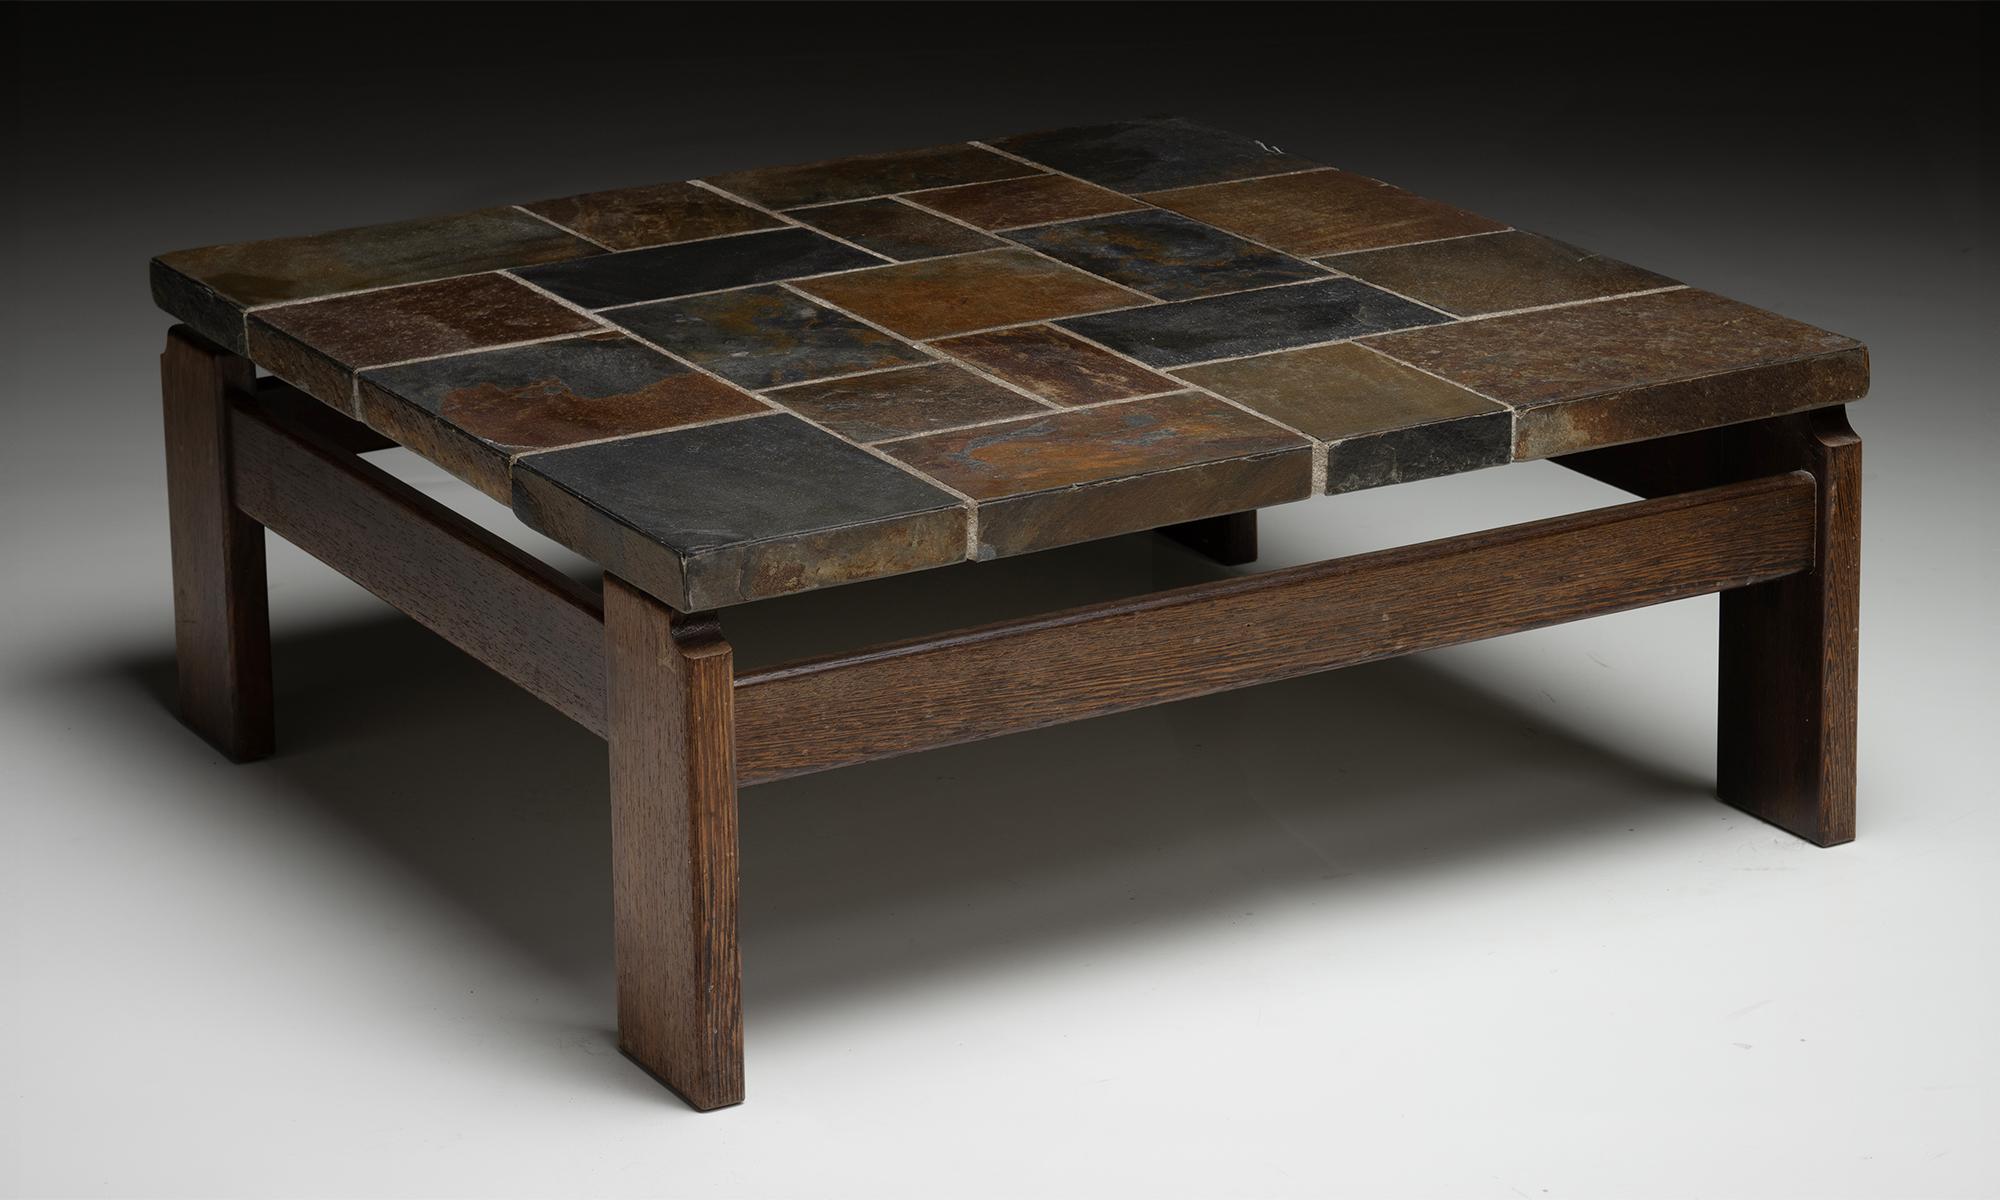 Slate Top Coffee Table

France circa 1970

Tiled slate surface with stained wooden frame.

35.5”w x 35.5”d x 14.5”h